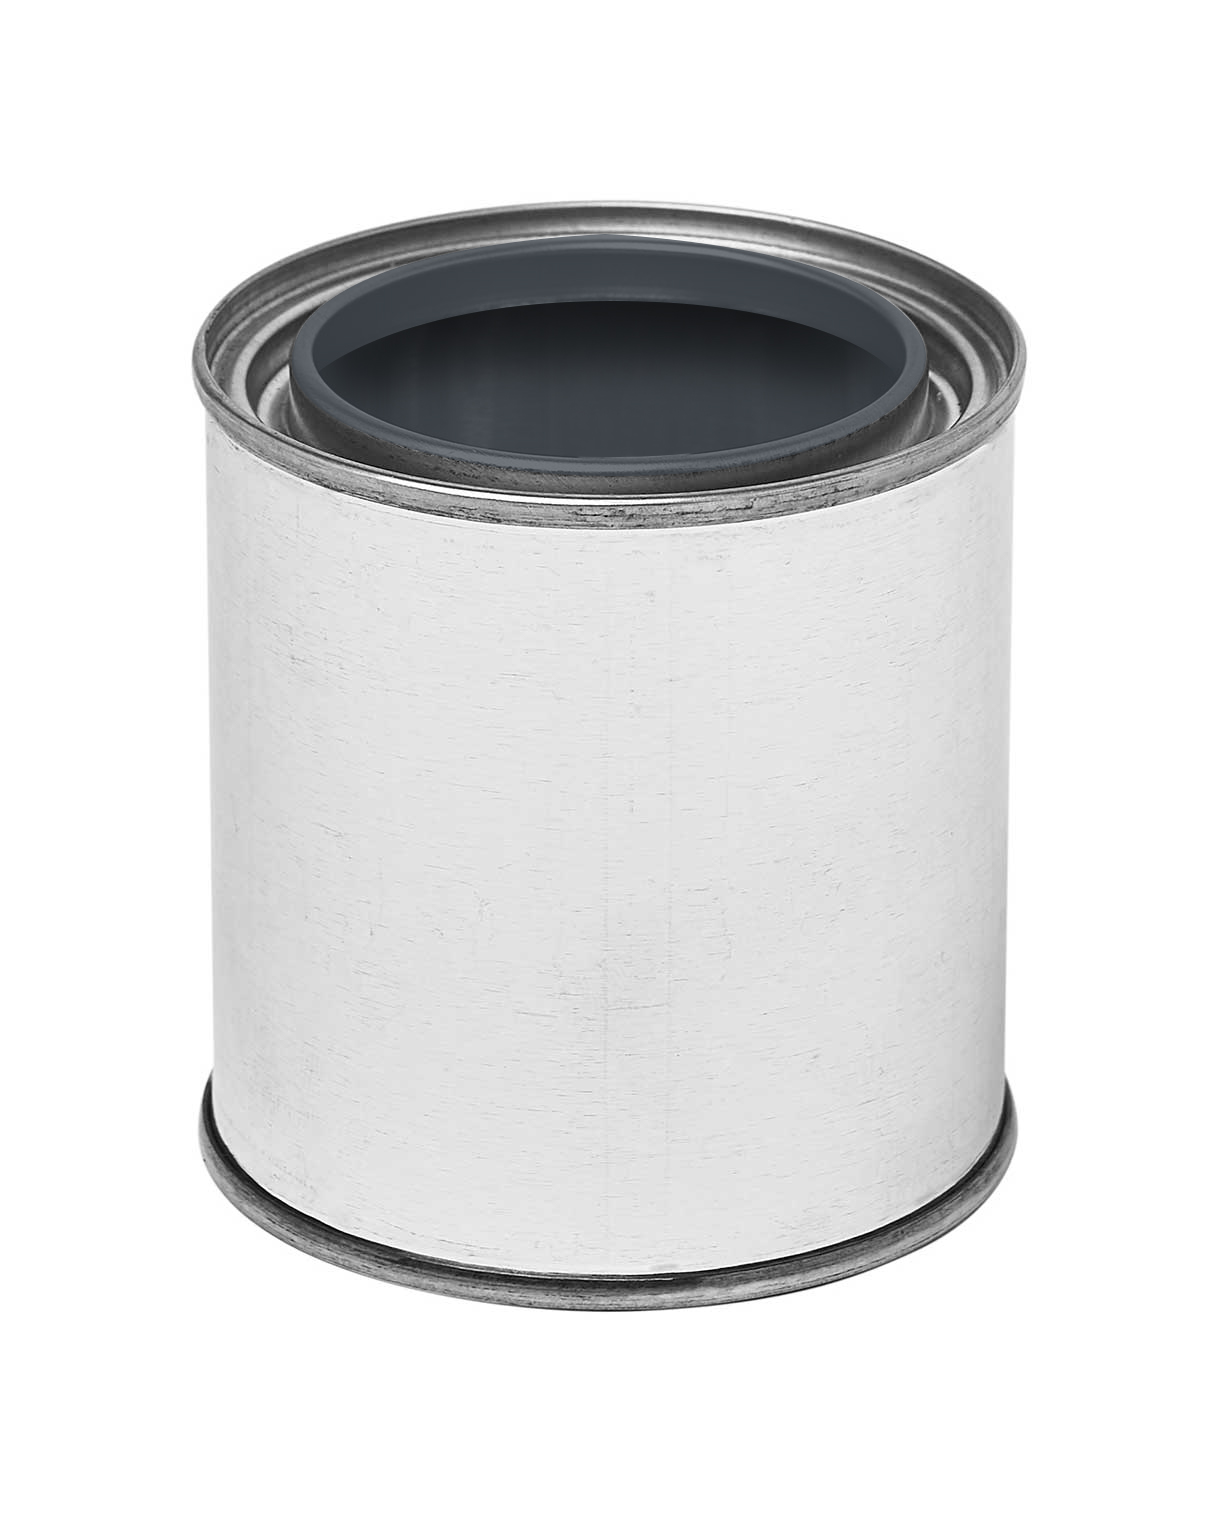 0.5 pt tin silver gray lined round-paint can